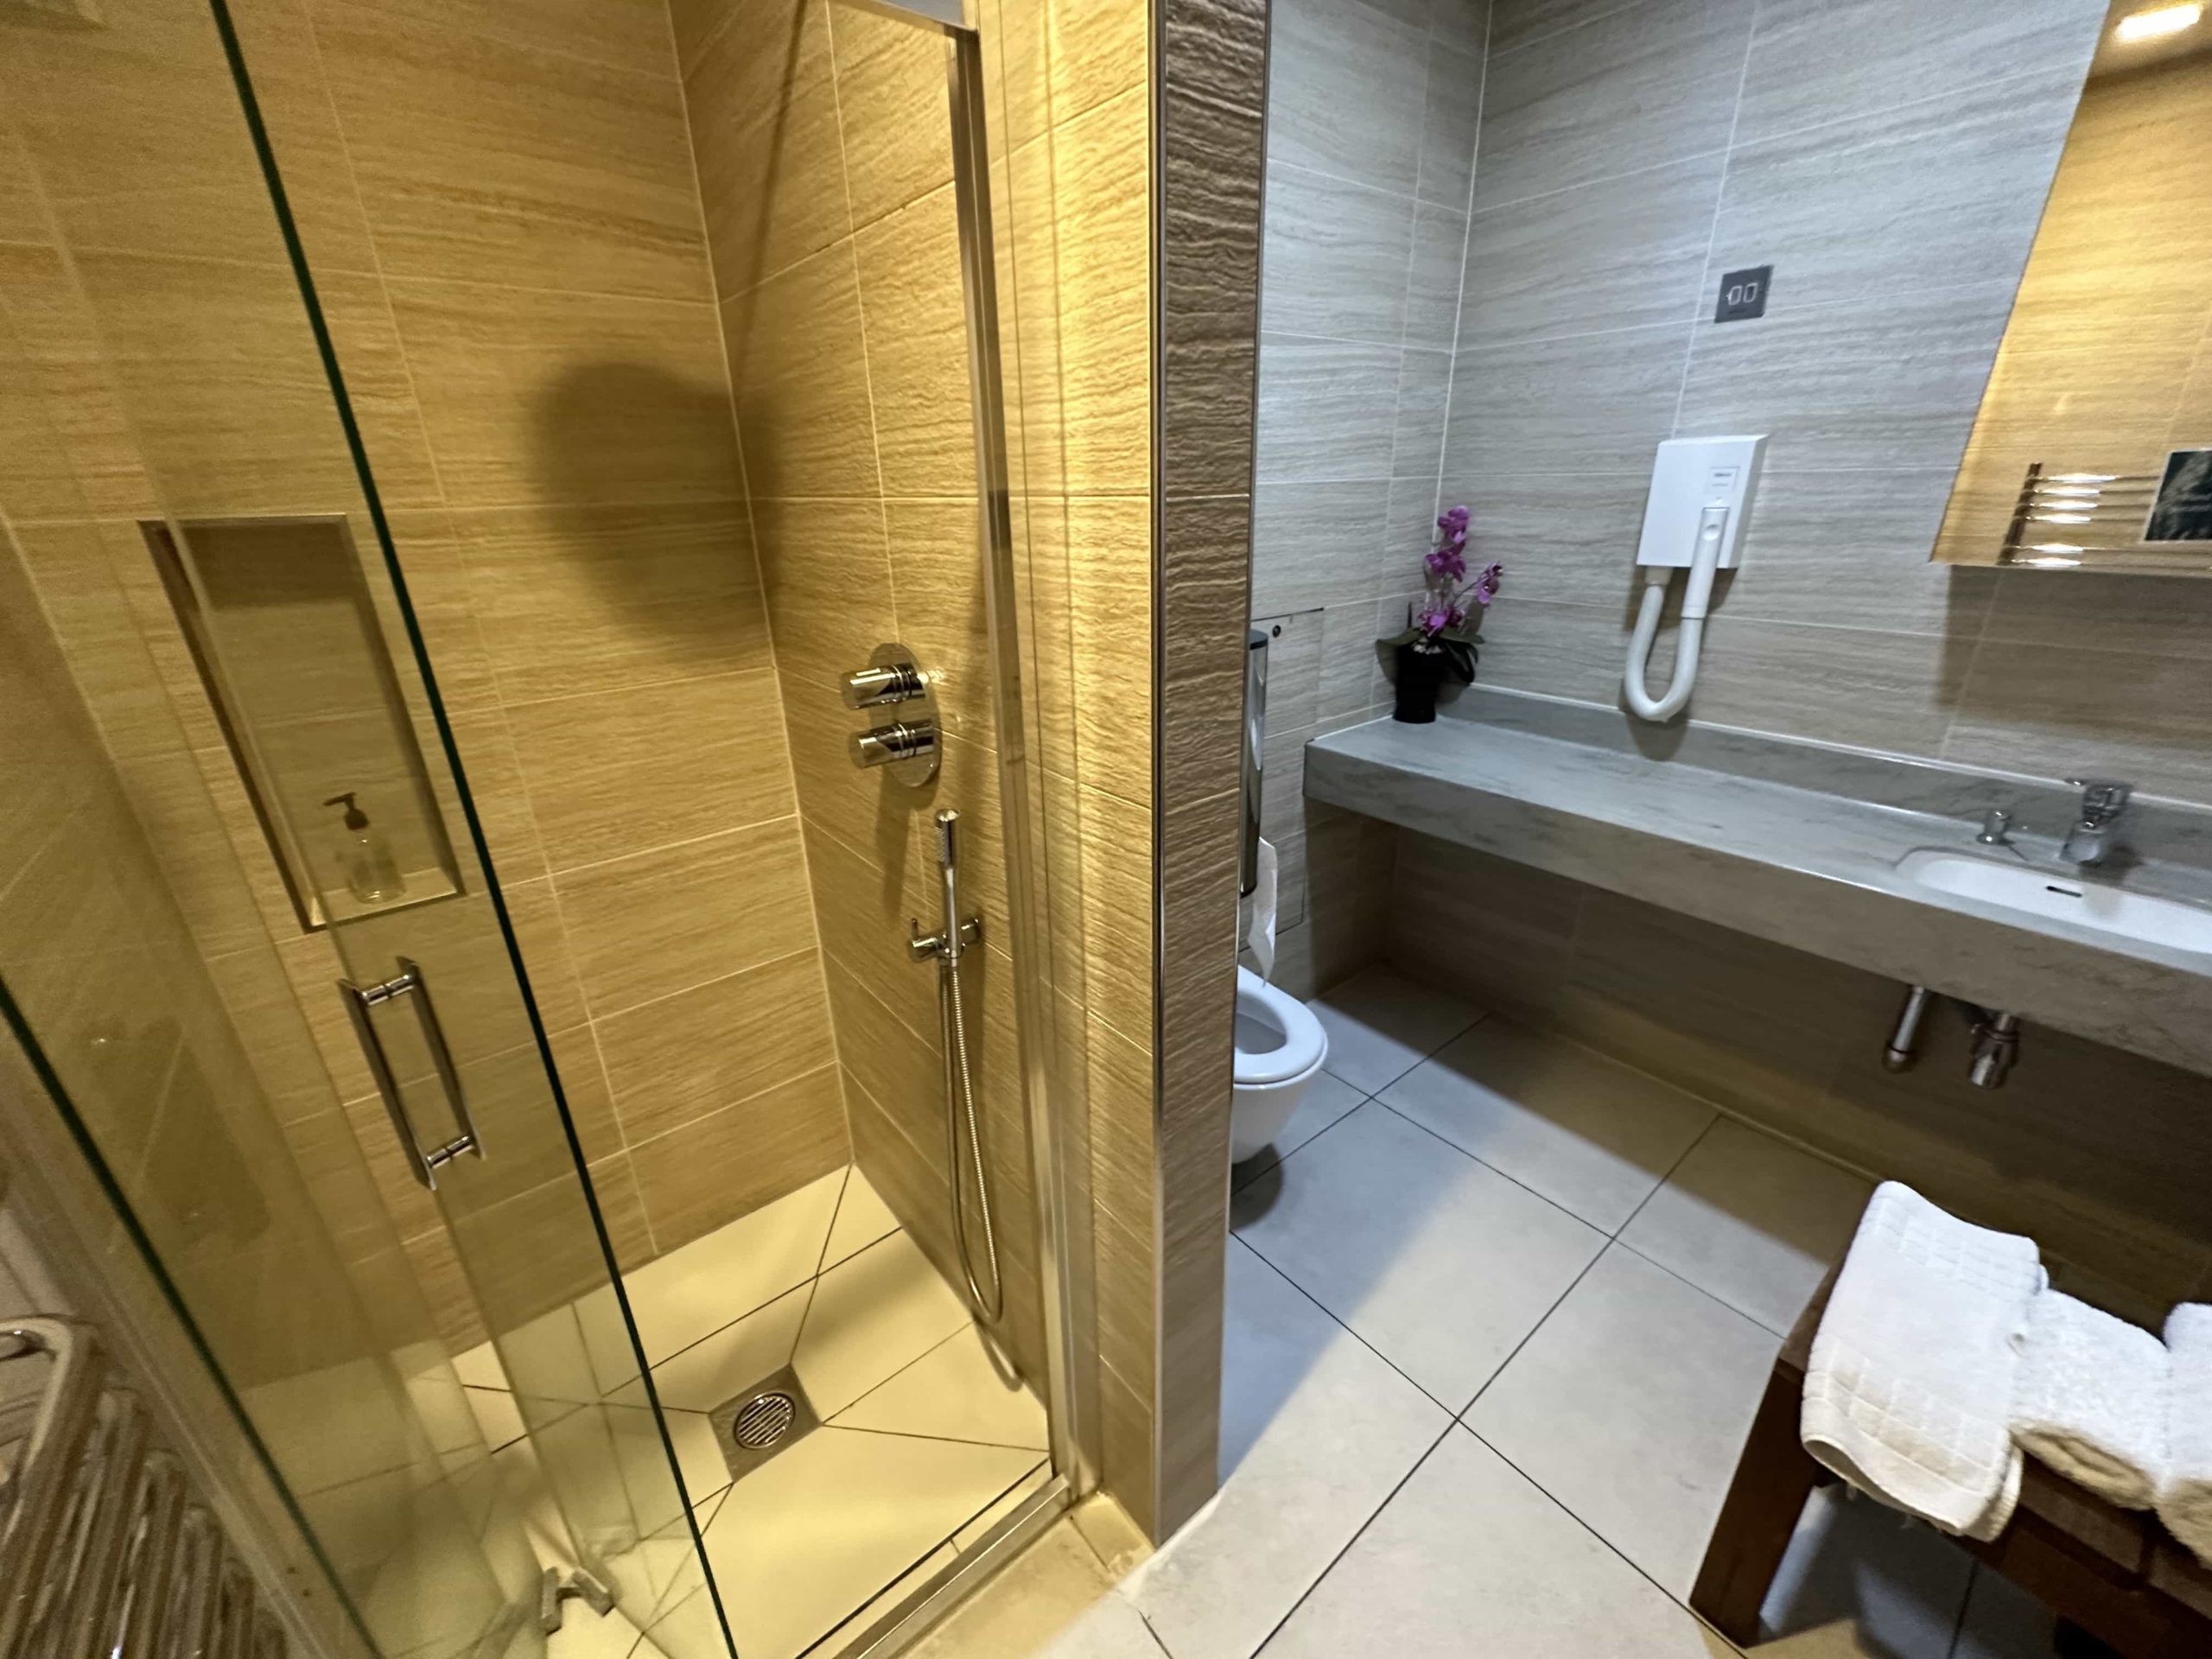 A small shower room, also with a toilet, sink, and amenities